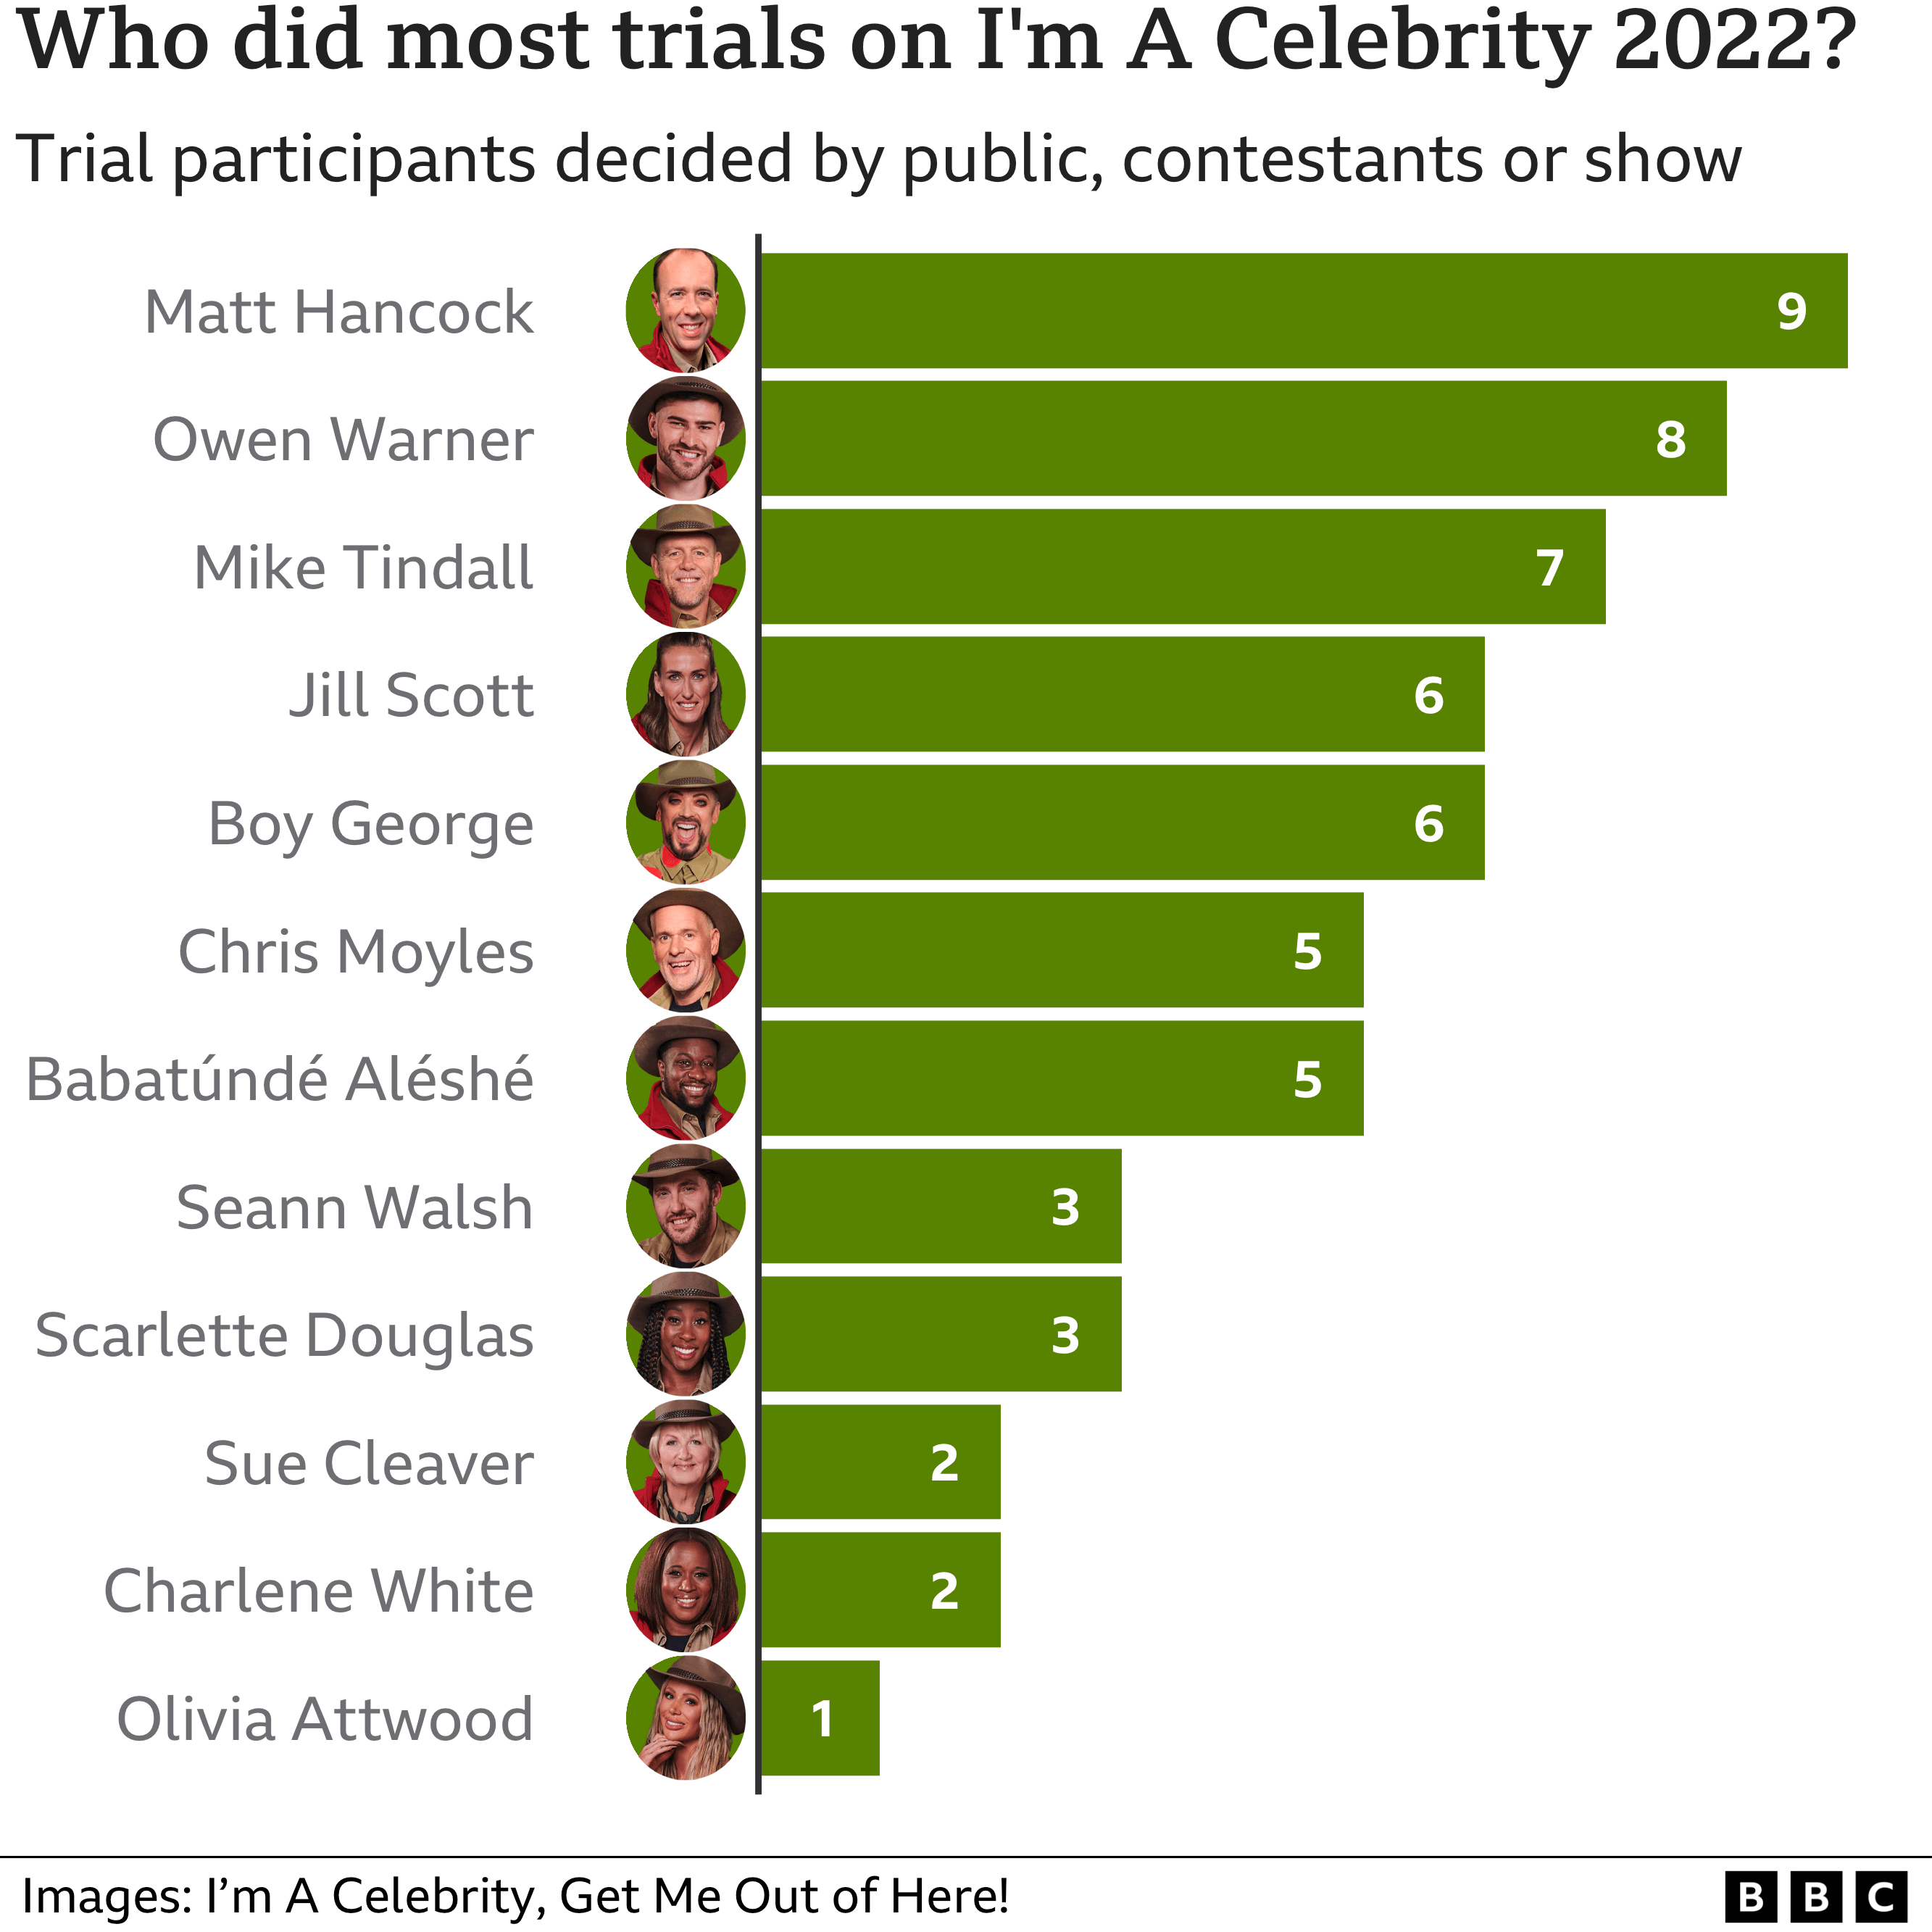 Graph showing which celebrities did the most trials during I'm A Celebrity 2022